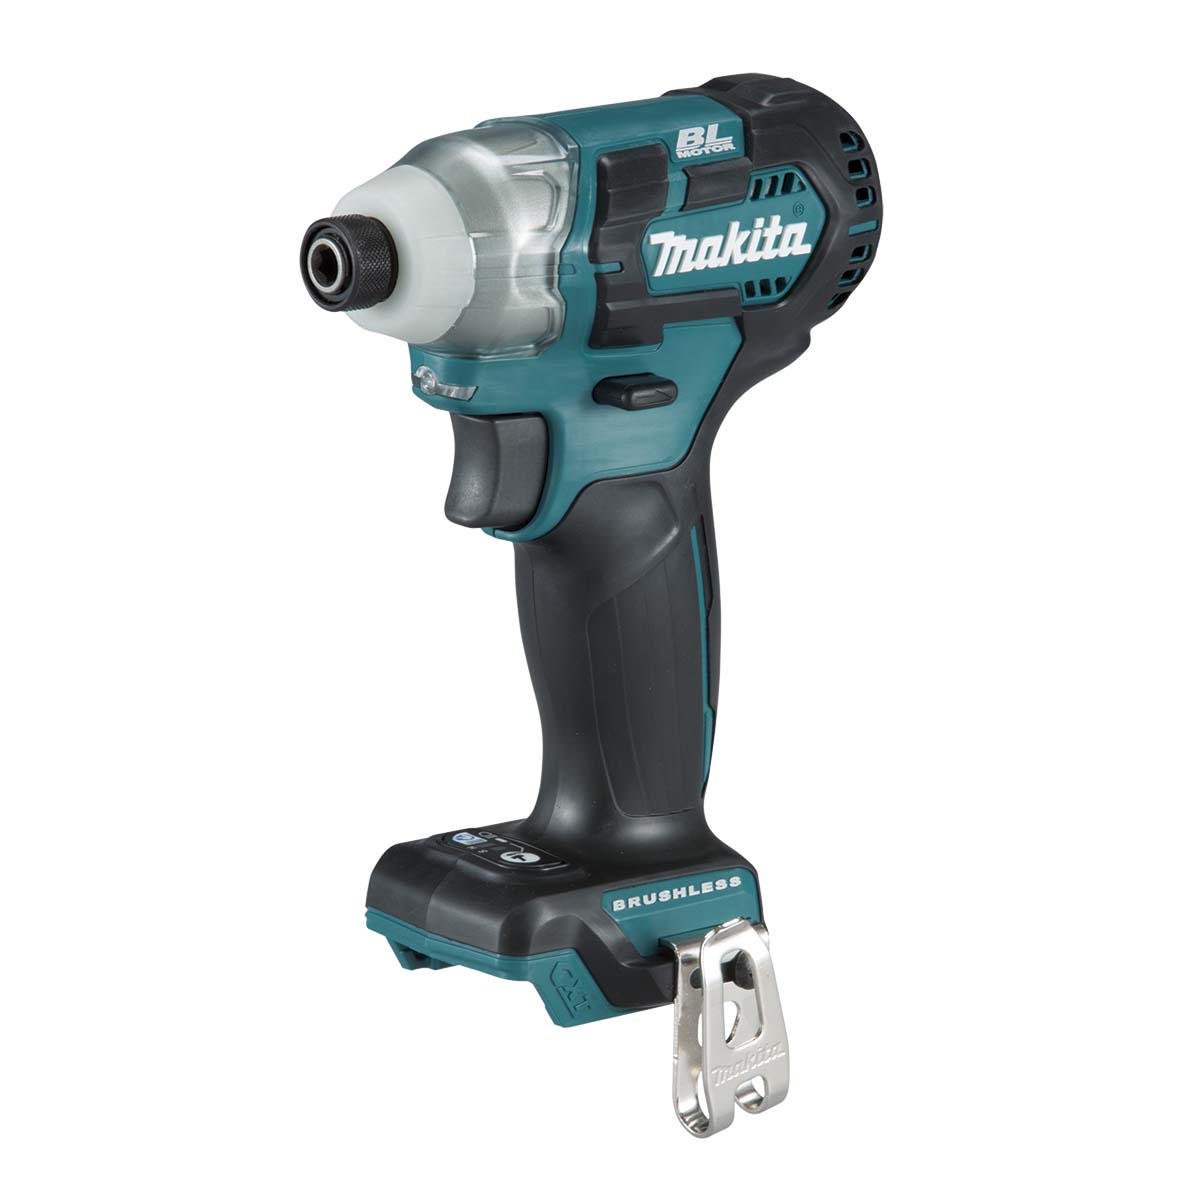 12V Brushless Impact Driver Bare (Tool Only) TD111DZ by Makita